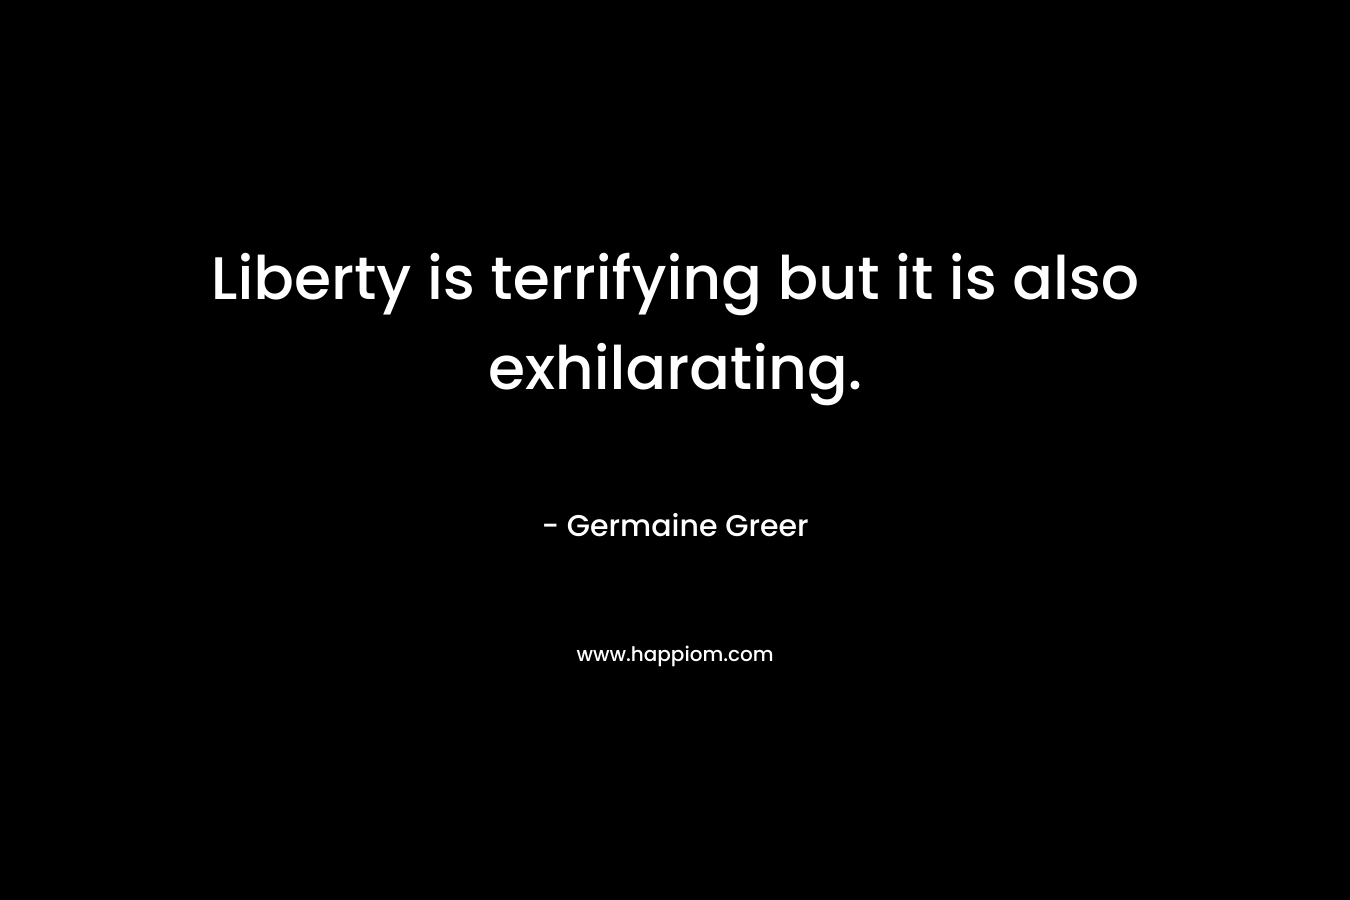 Liberty is terrifying but it is also exhilarating. – Germaine Greer